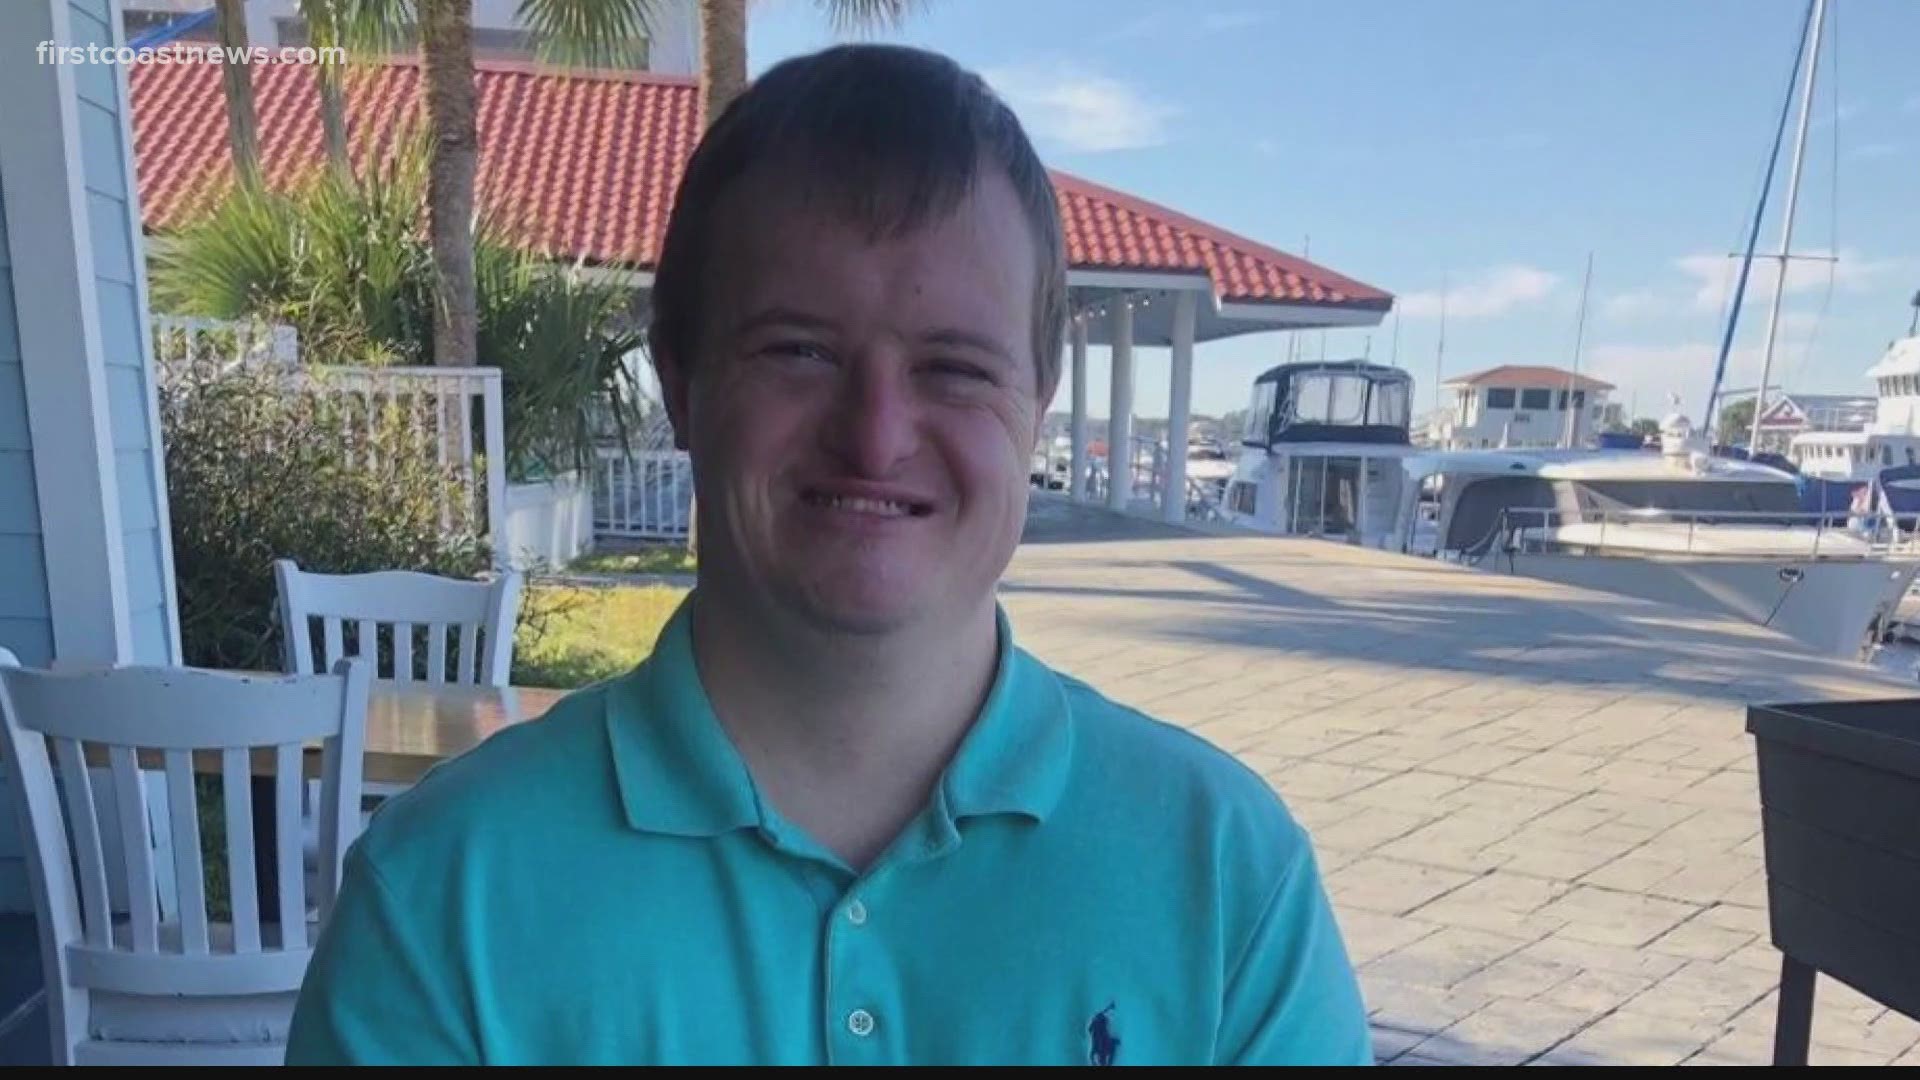 The CDC included those with Down syndrome to the list of people at an increased risk of developing severe illness from COVID-19, but Fla. has not added that group.